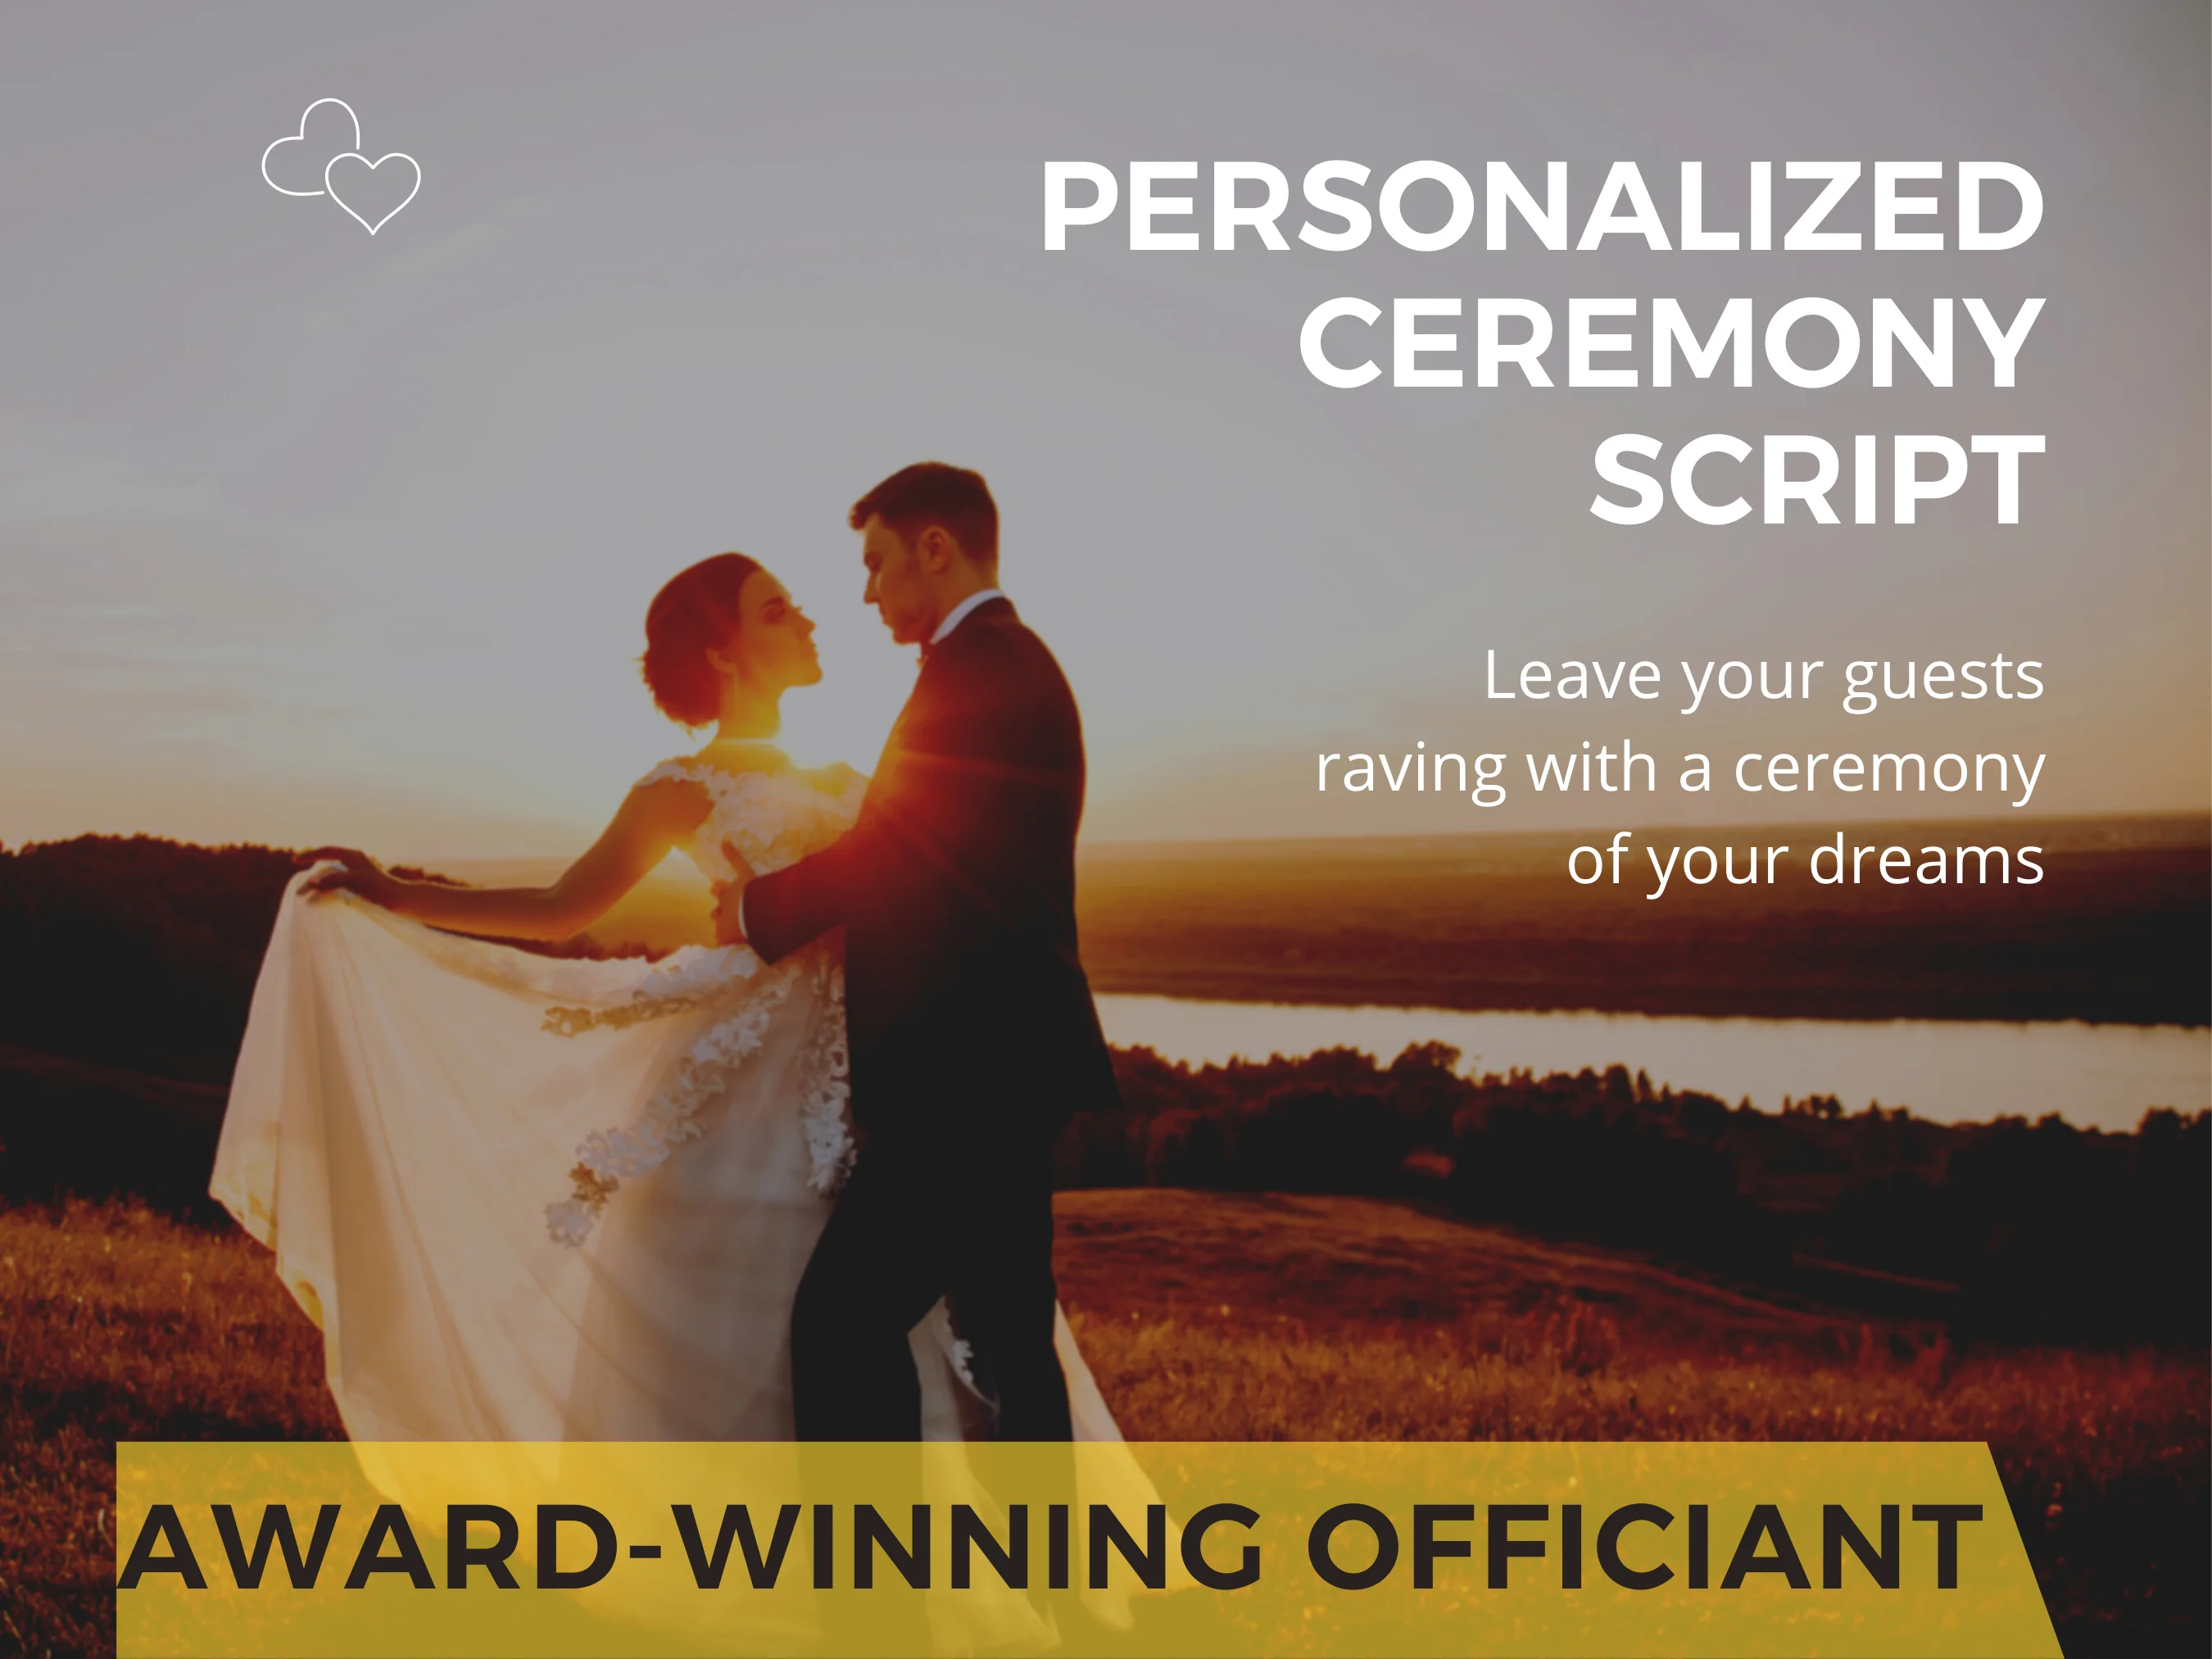 graphic for award-winning officiant's personalized ceremony script